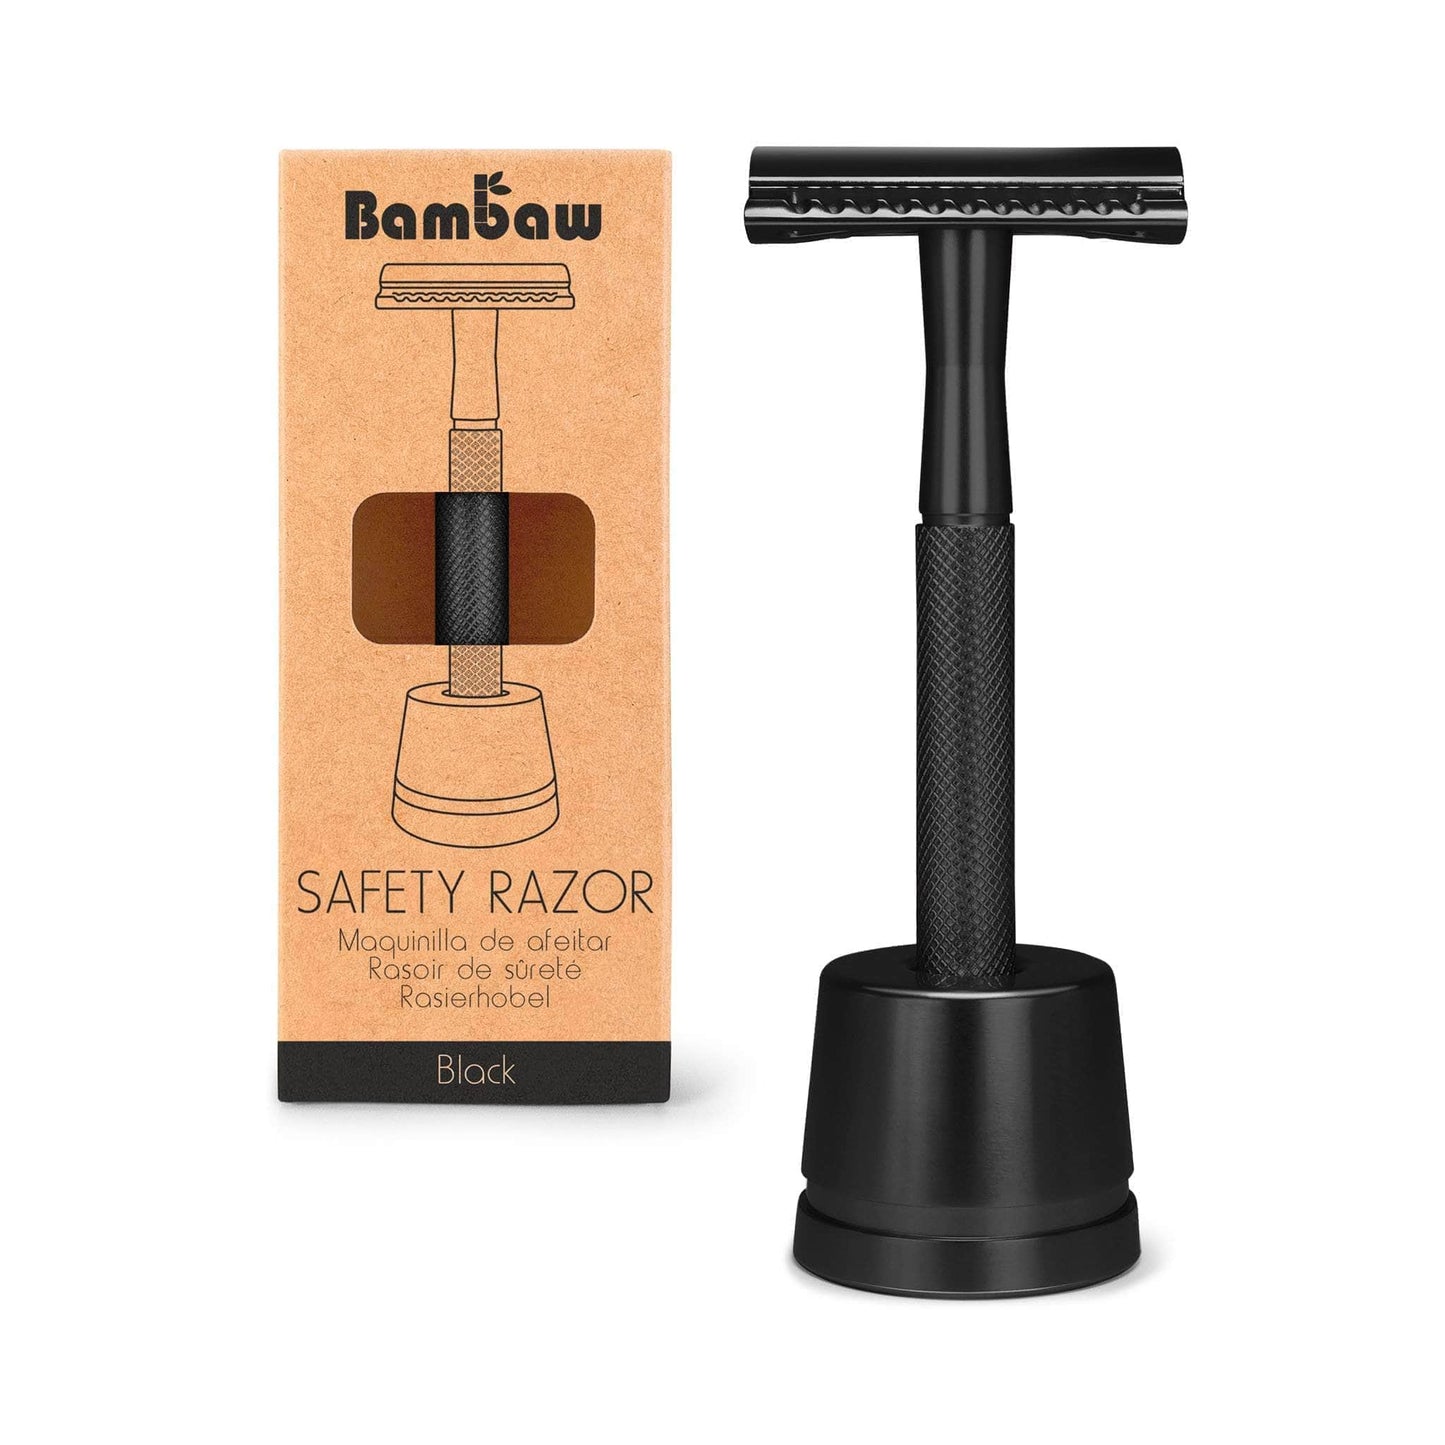 Bambaw Shaving Accessories Black Bambaw Stainless Steel Safety Razor + Stand